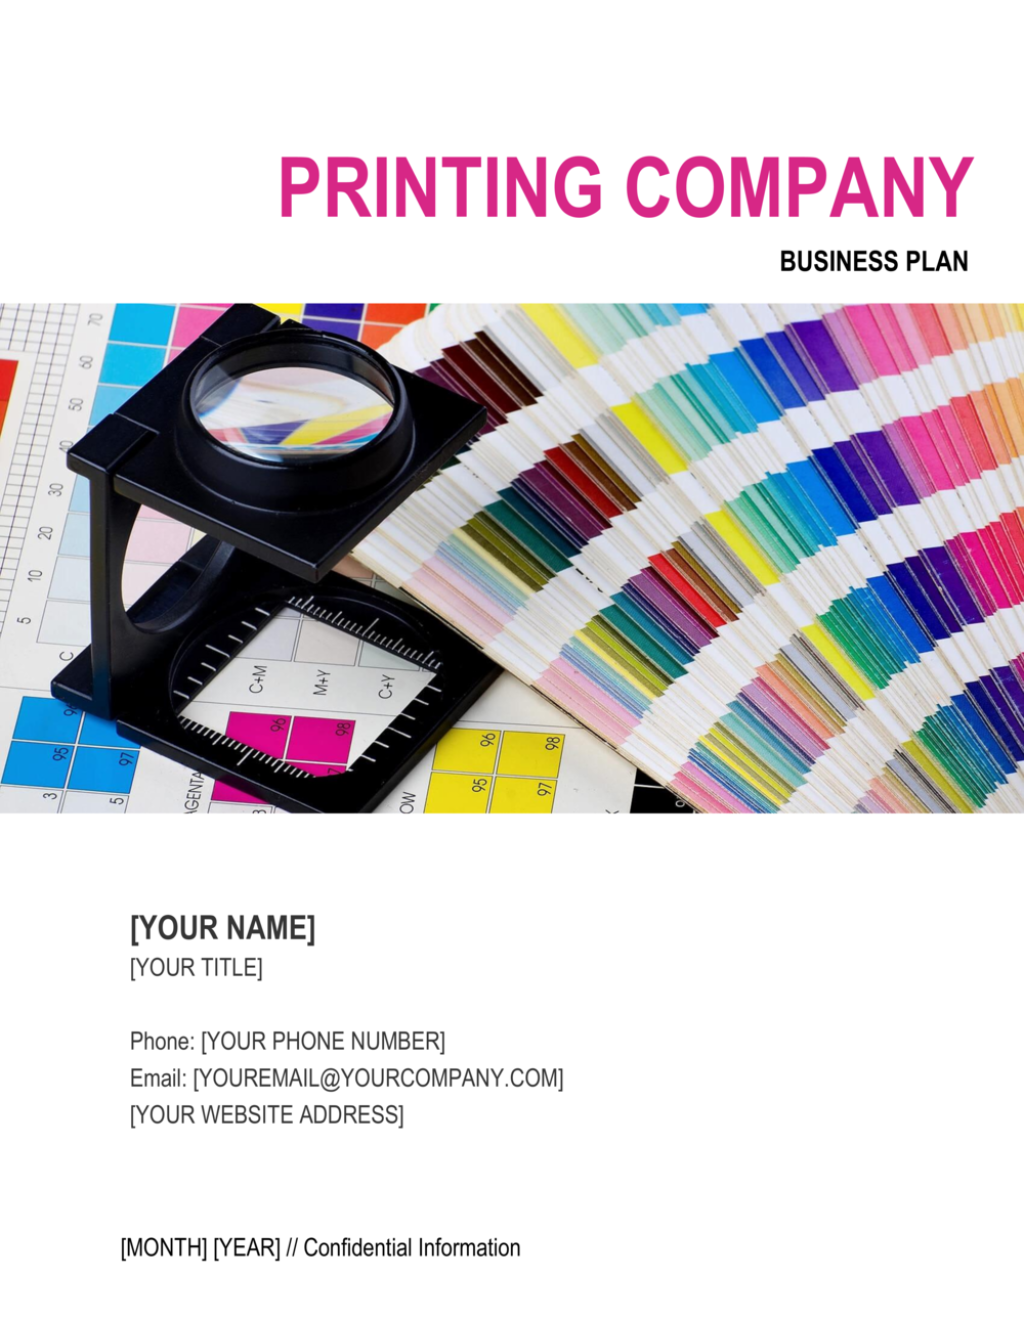 printing company business plan template business in a